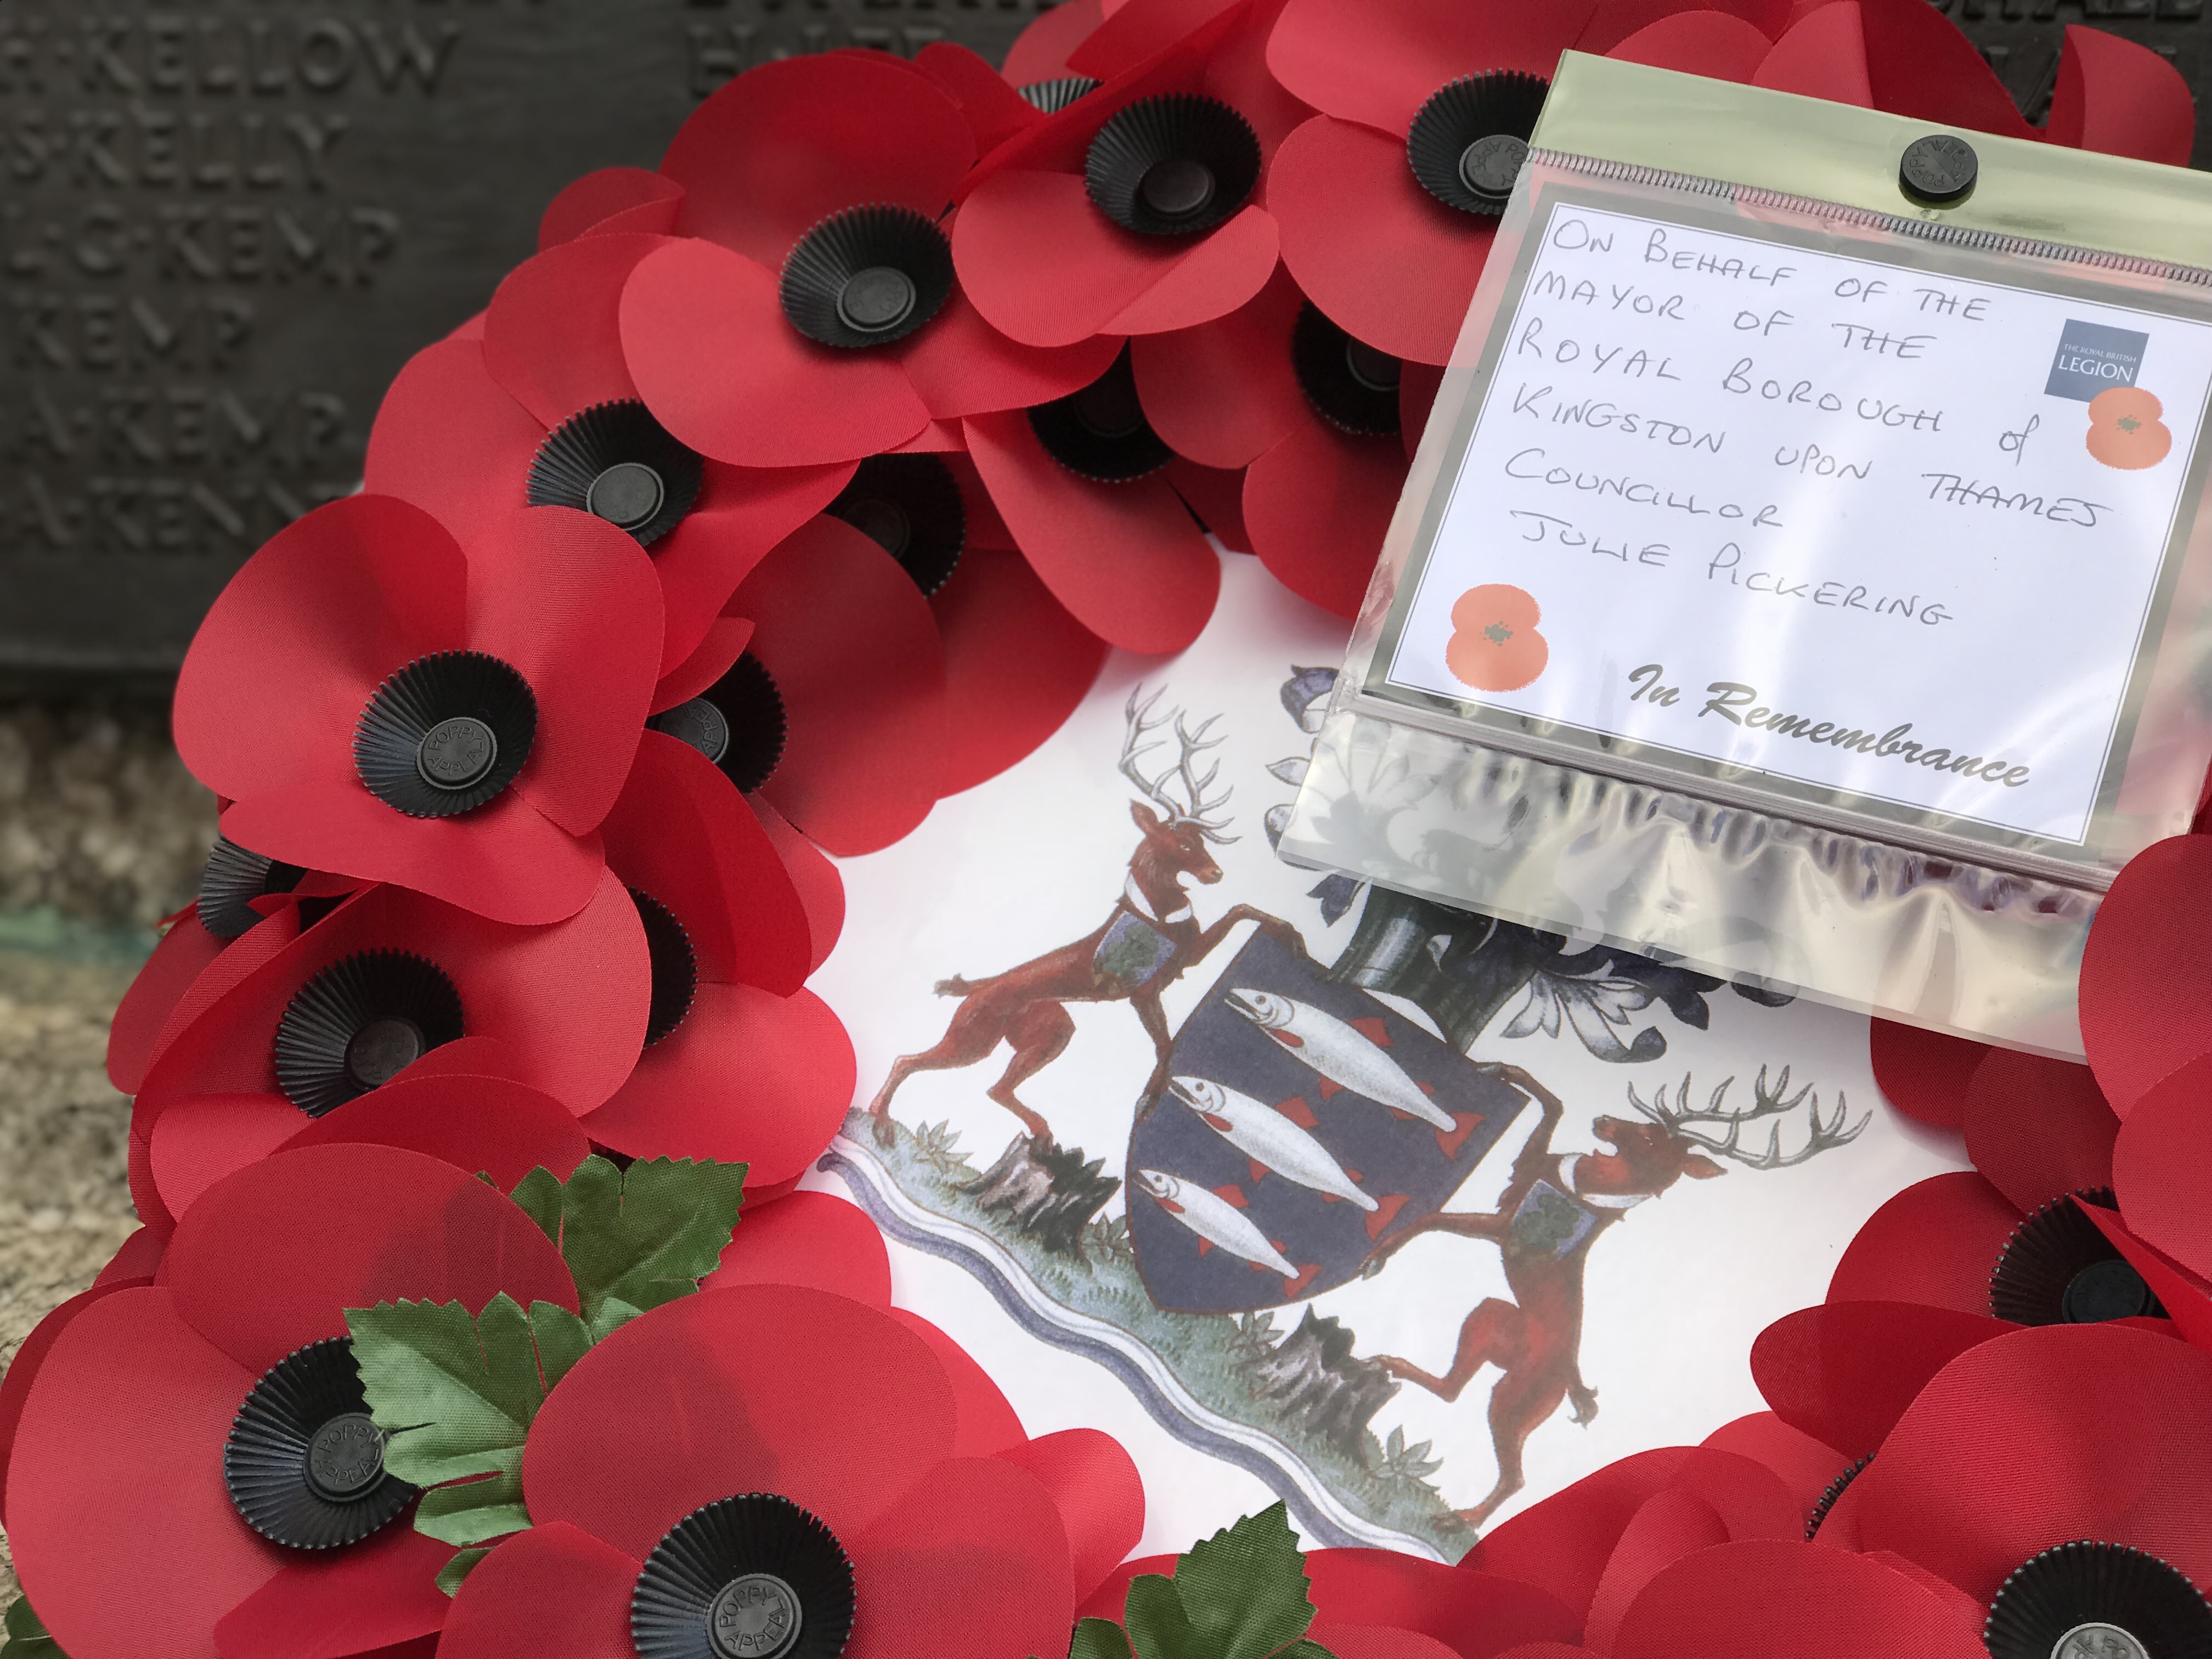 Images of a wreath at Remembrance Sunday 2018, signed by the then Mayor of Kingston